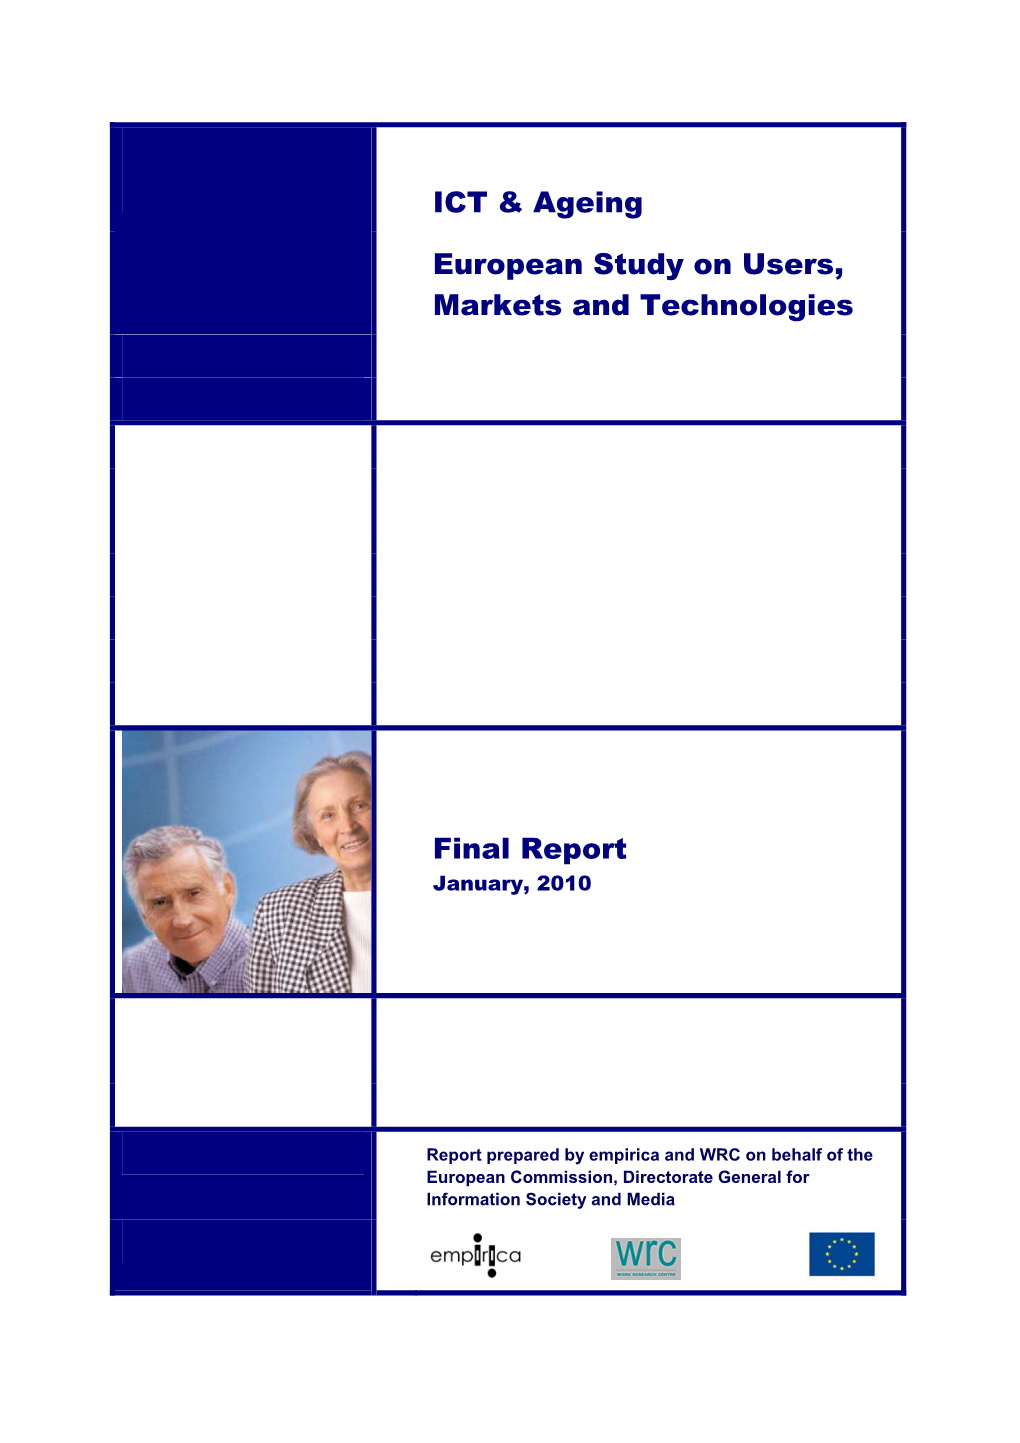 ICT & Ageing European Study on Users, Markets and Technologies